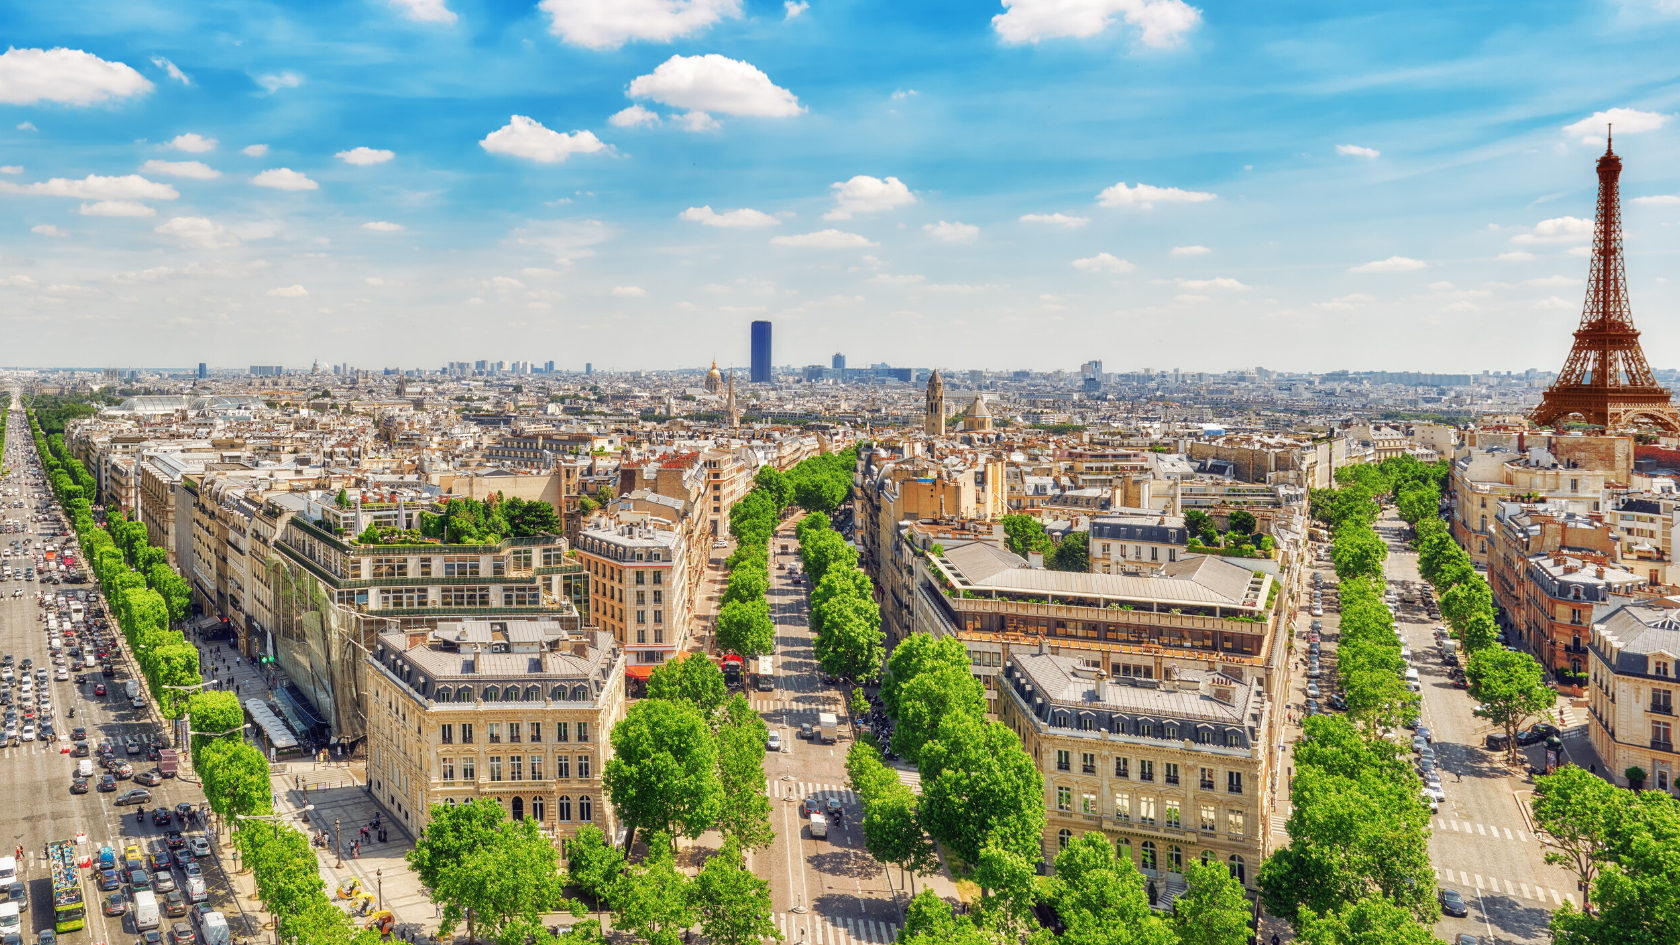 Did you know? Where does the name Champs-Elysées come from